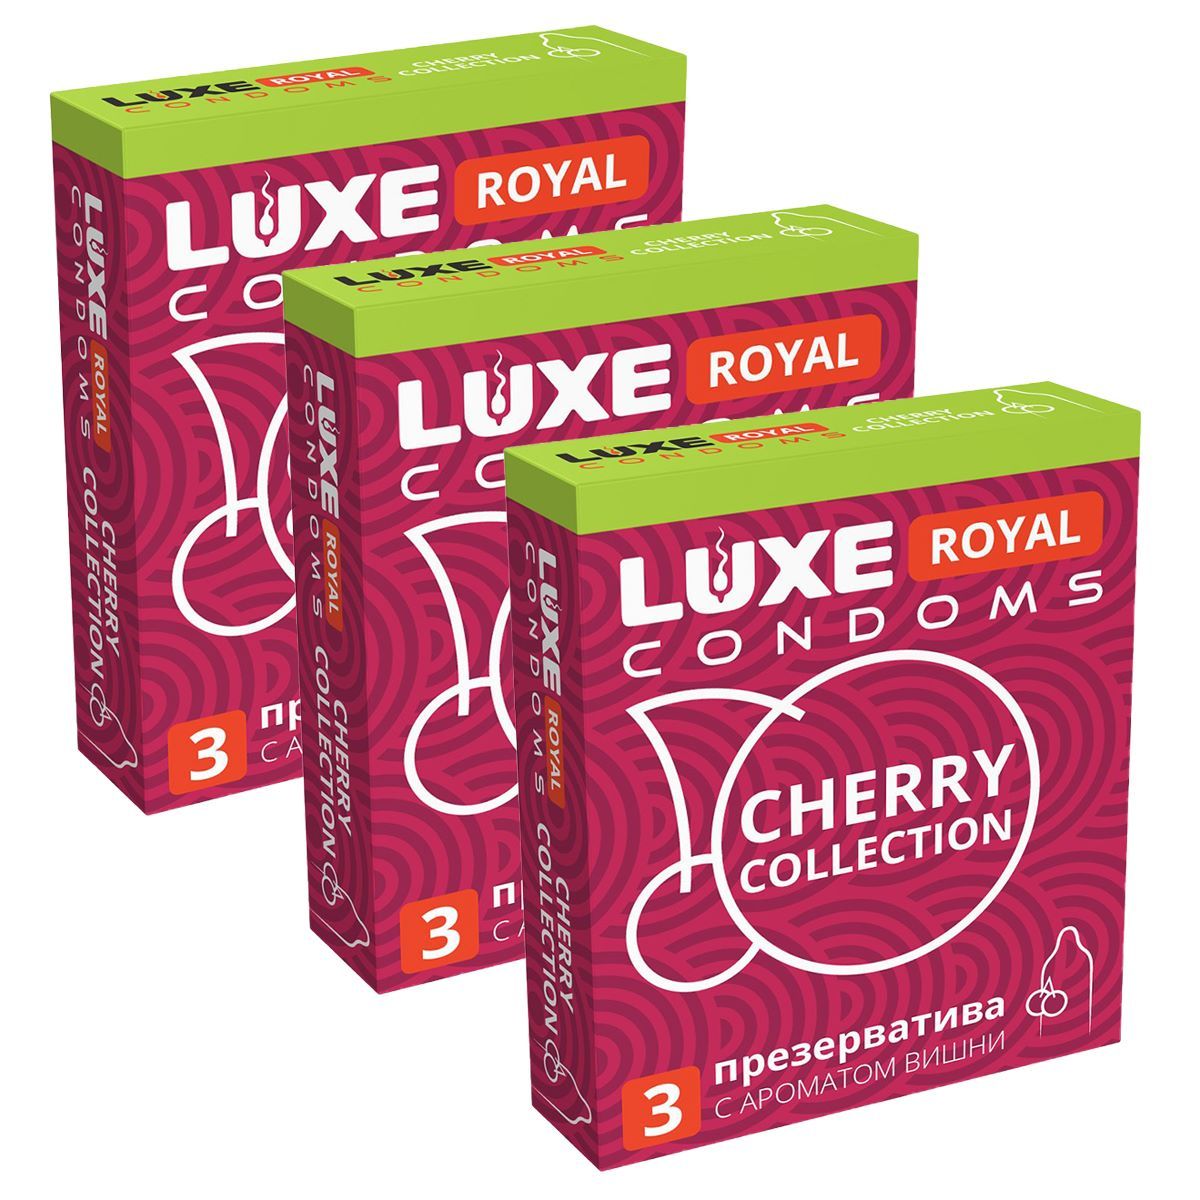 Cherry collection. Luxe Royal презервативы вишня. Luxe Royal condoms. Презервативы Luxe Royal Cherry collection 1х24. Вишня Роял Тияго.